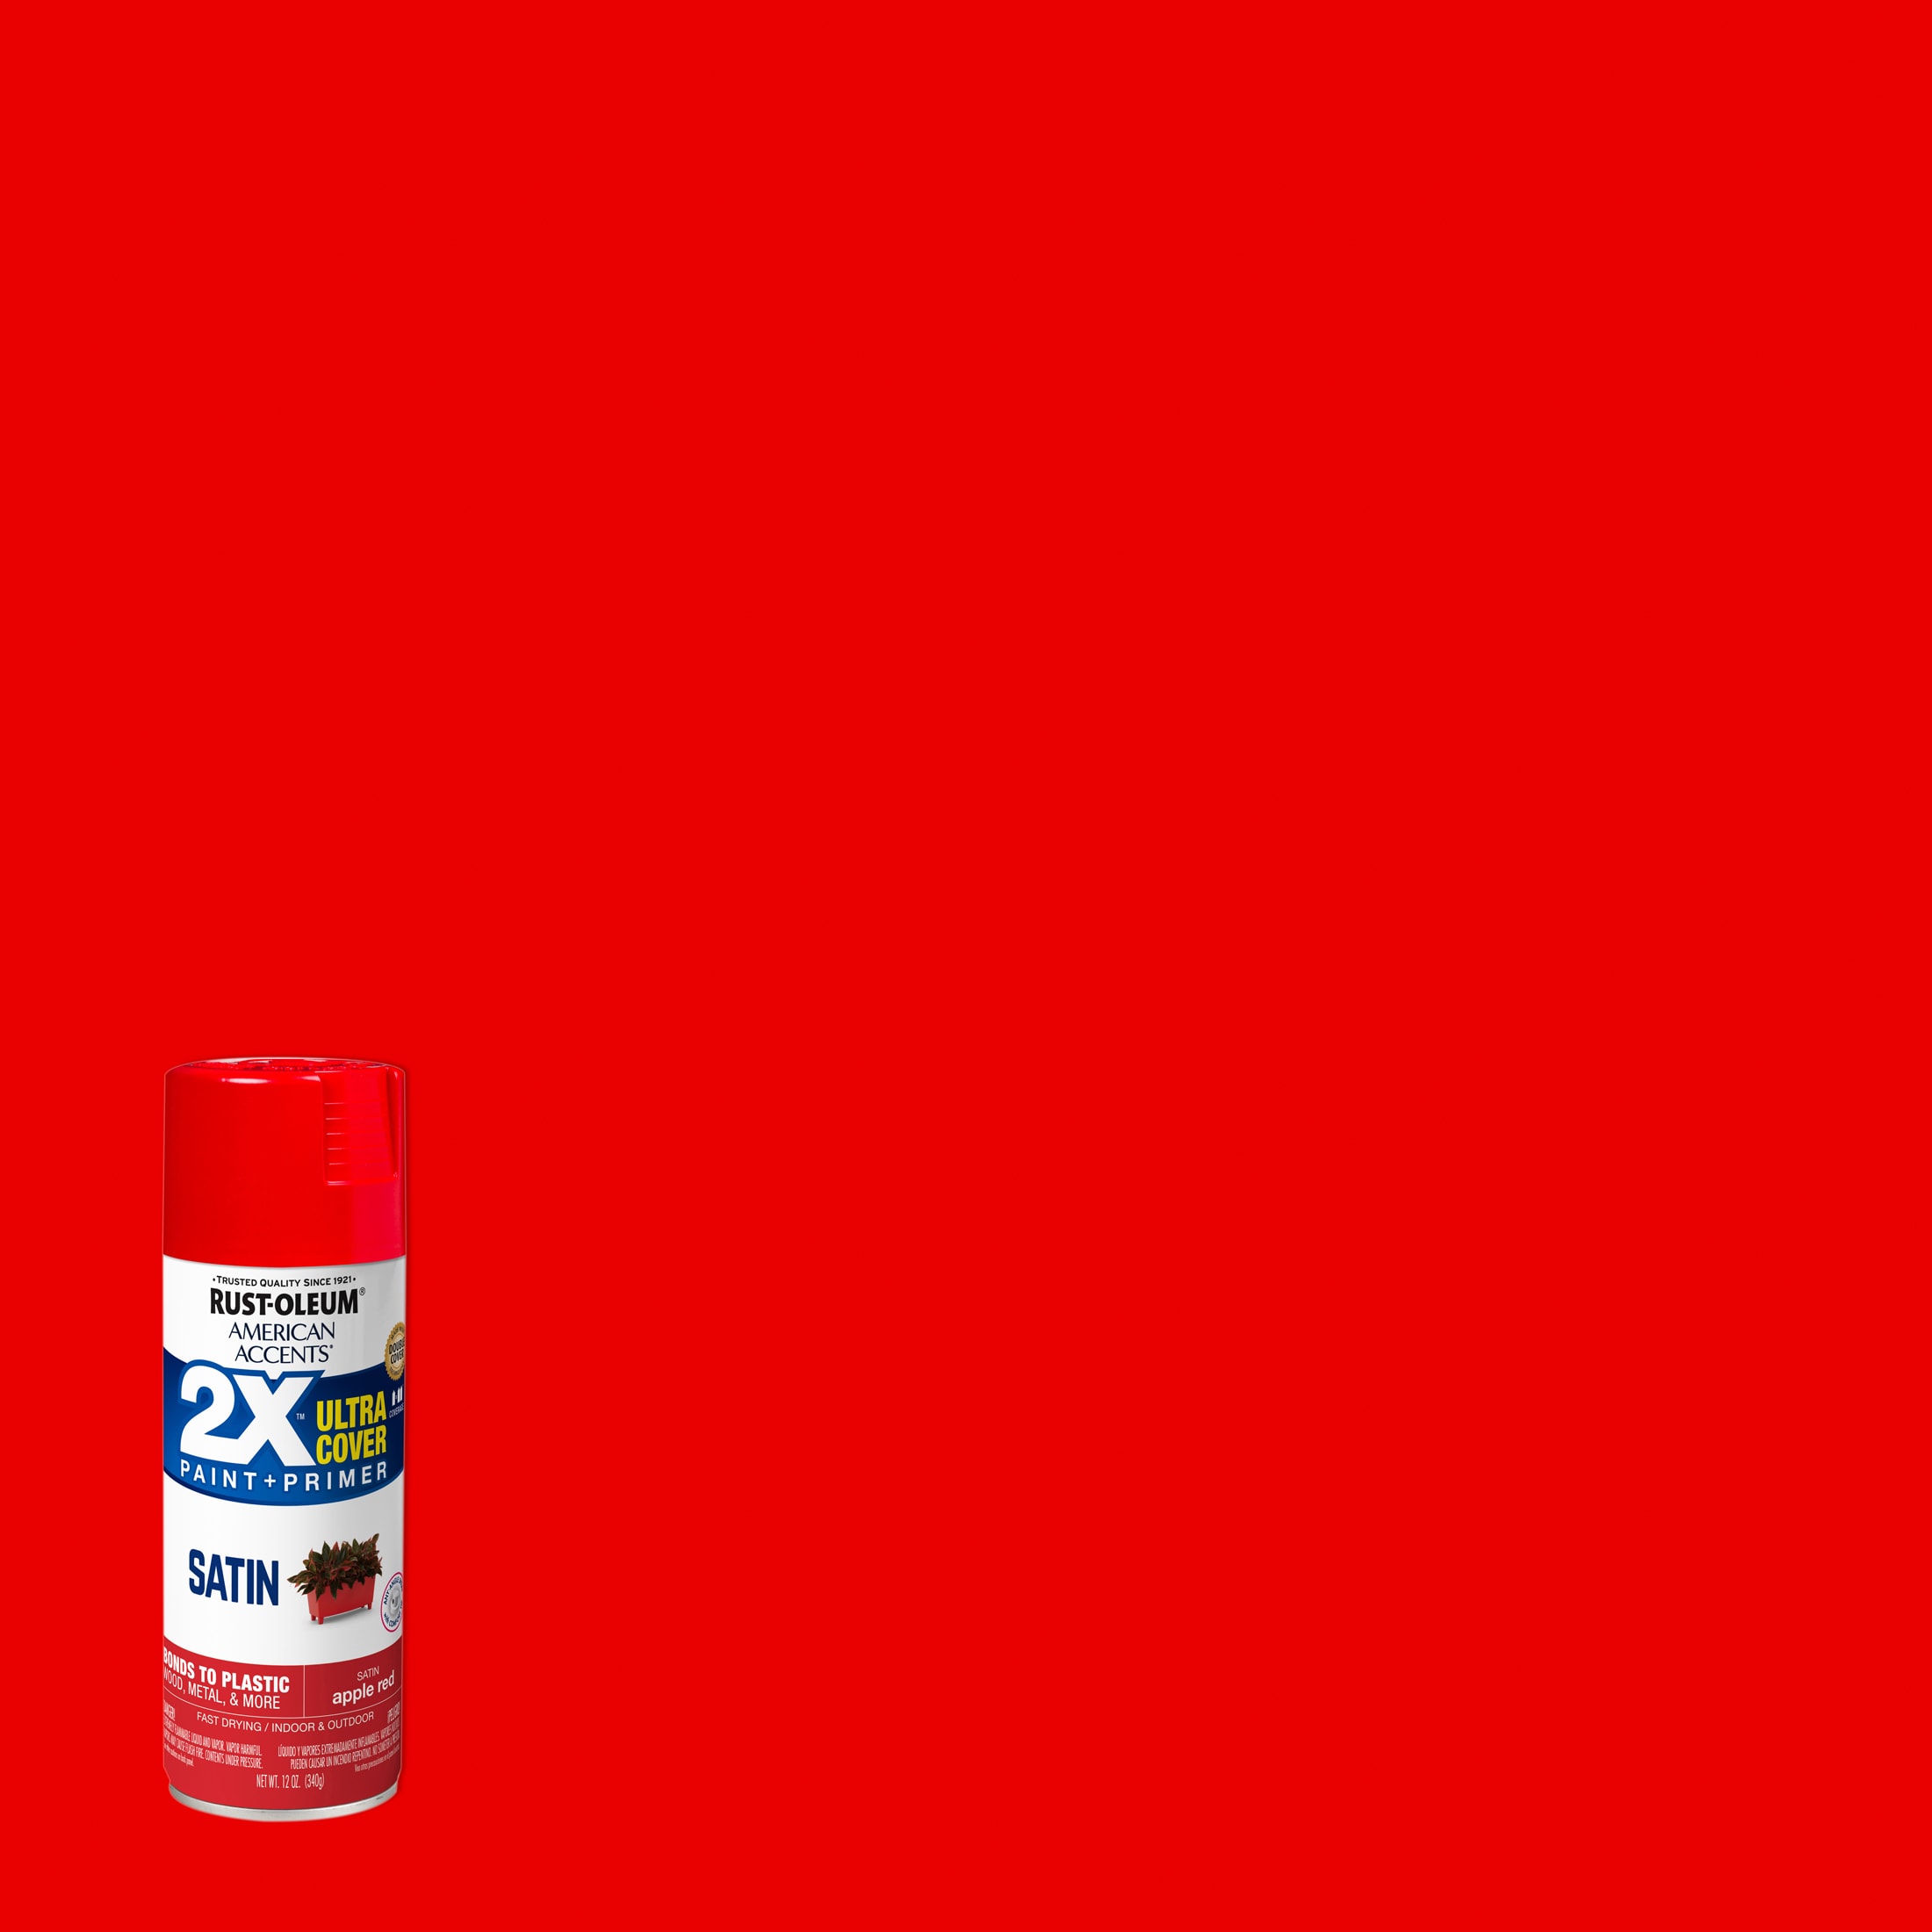 Rust-Oleum 327938 American Accents Spray Paint, Satin Apple Red, 72 Ounce